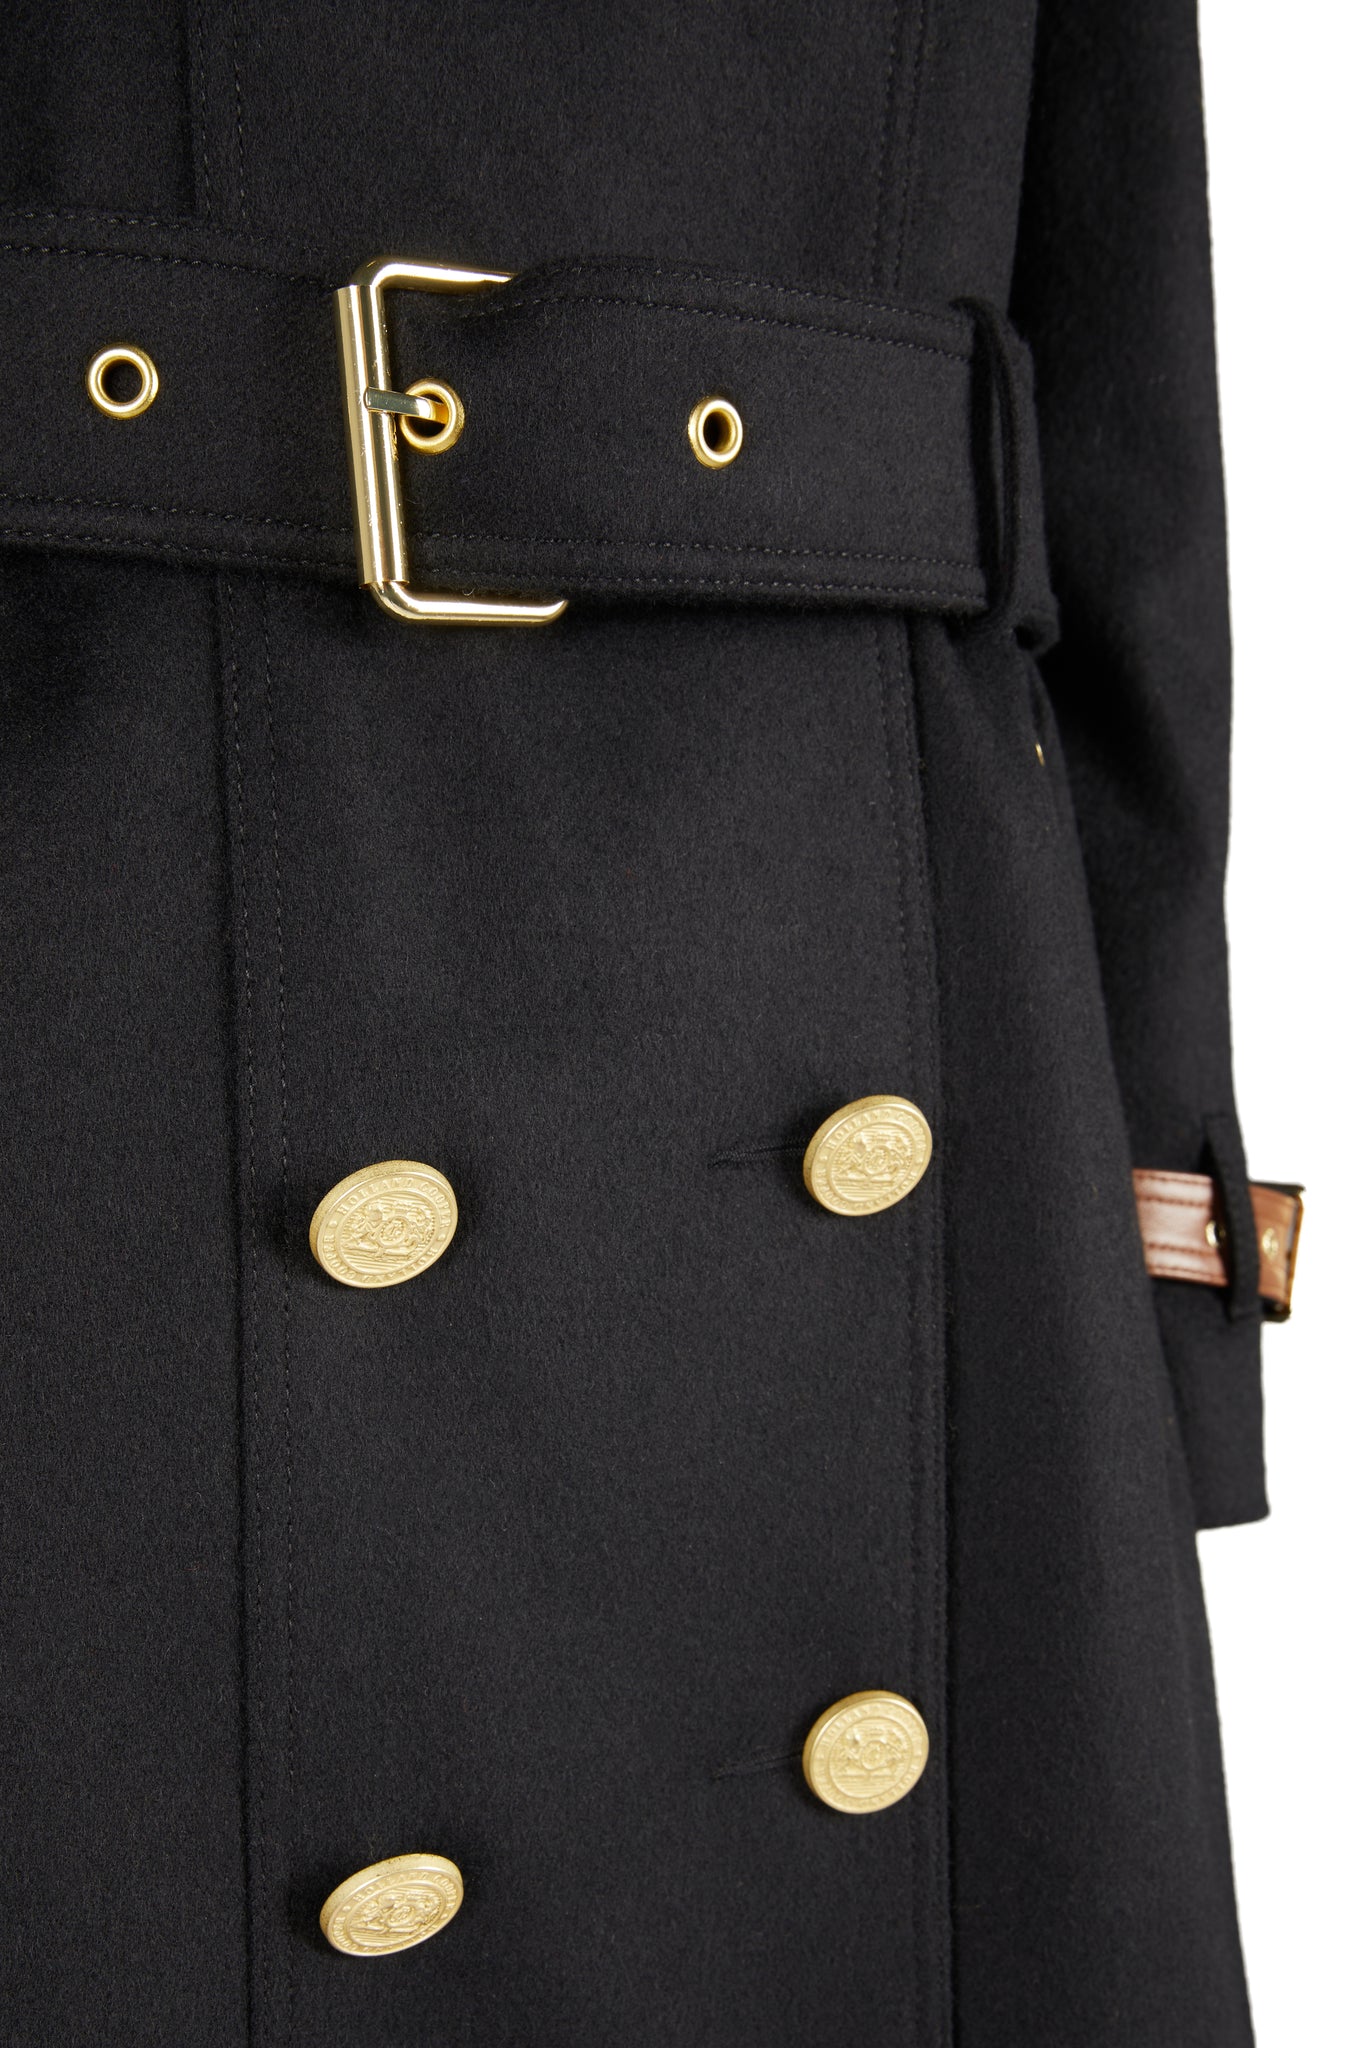 Button detail of Womens black and tan brown leather detailed with gold hardware knee length wool trench coat